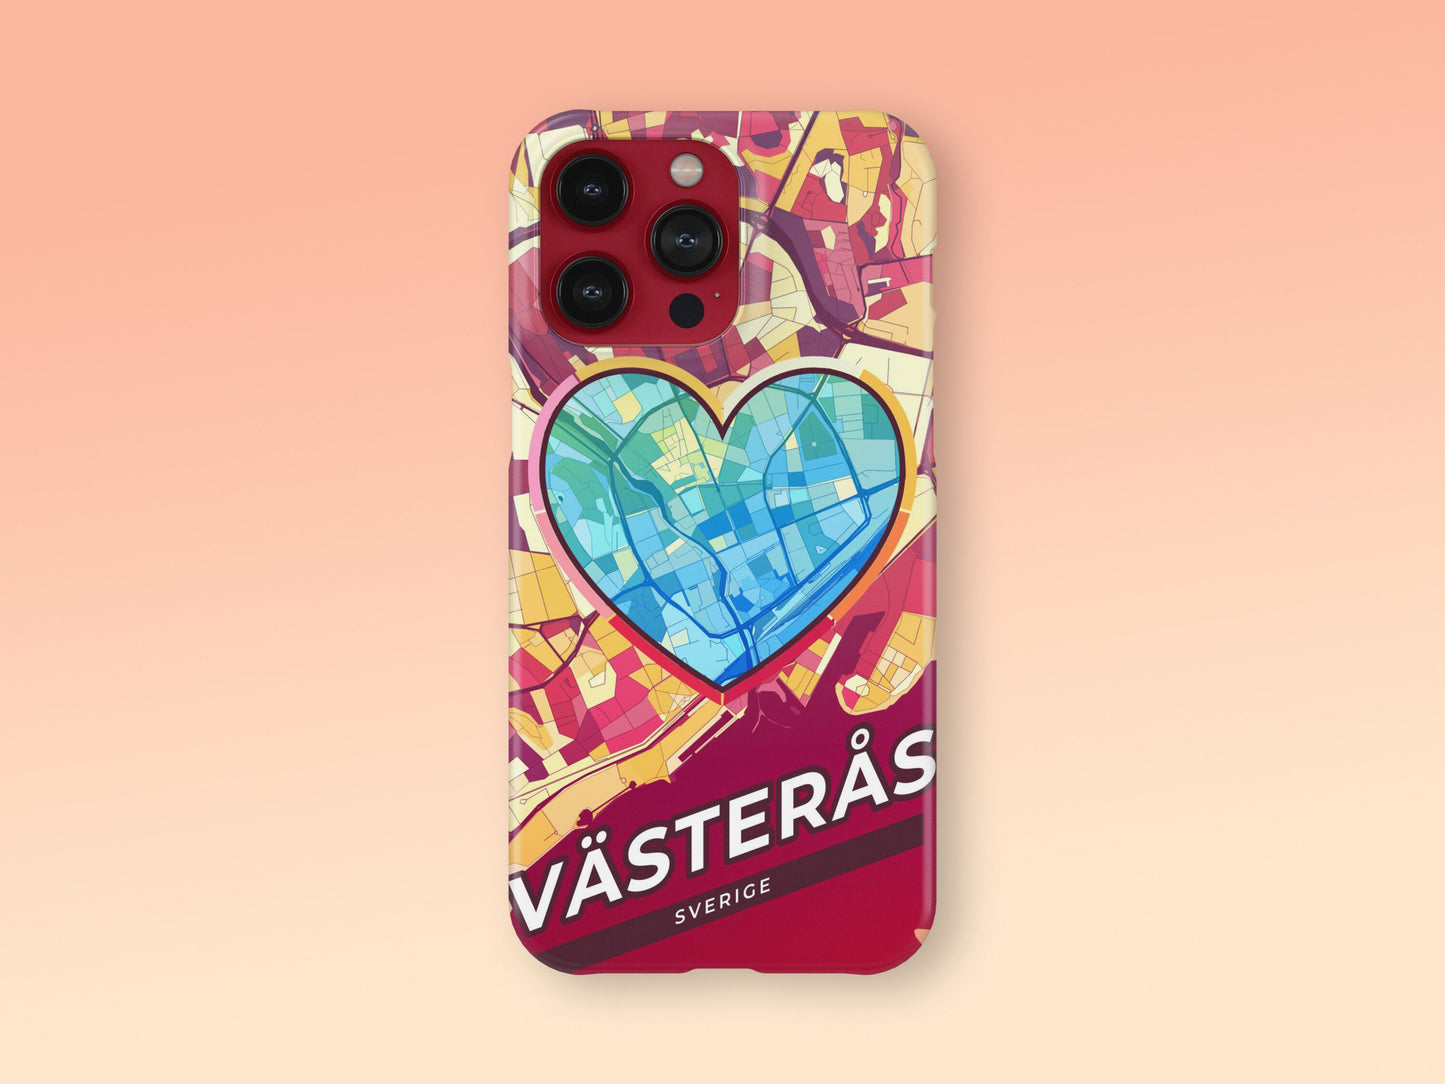 Västerås Sweden slim phone case with colorful icon 2